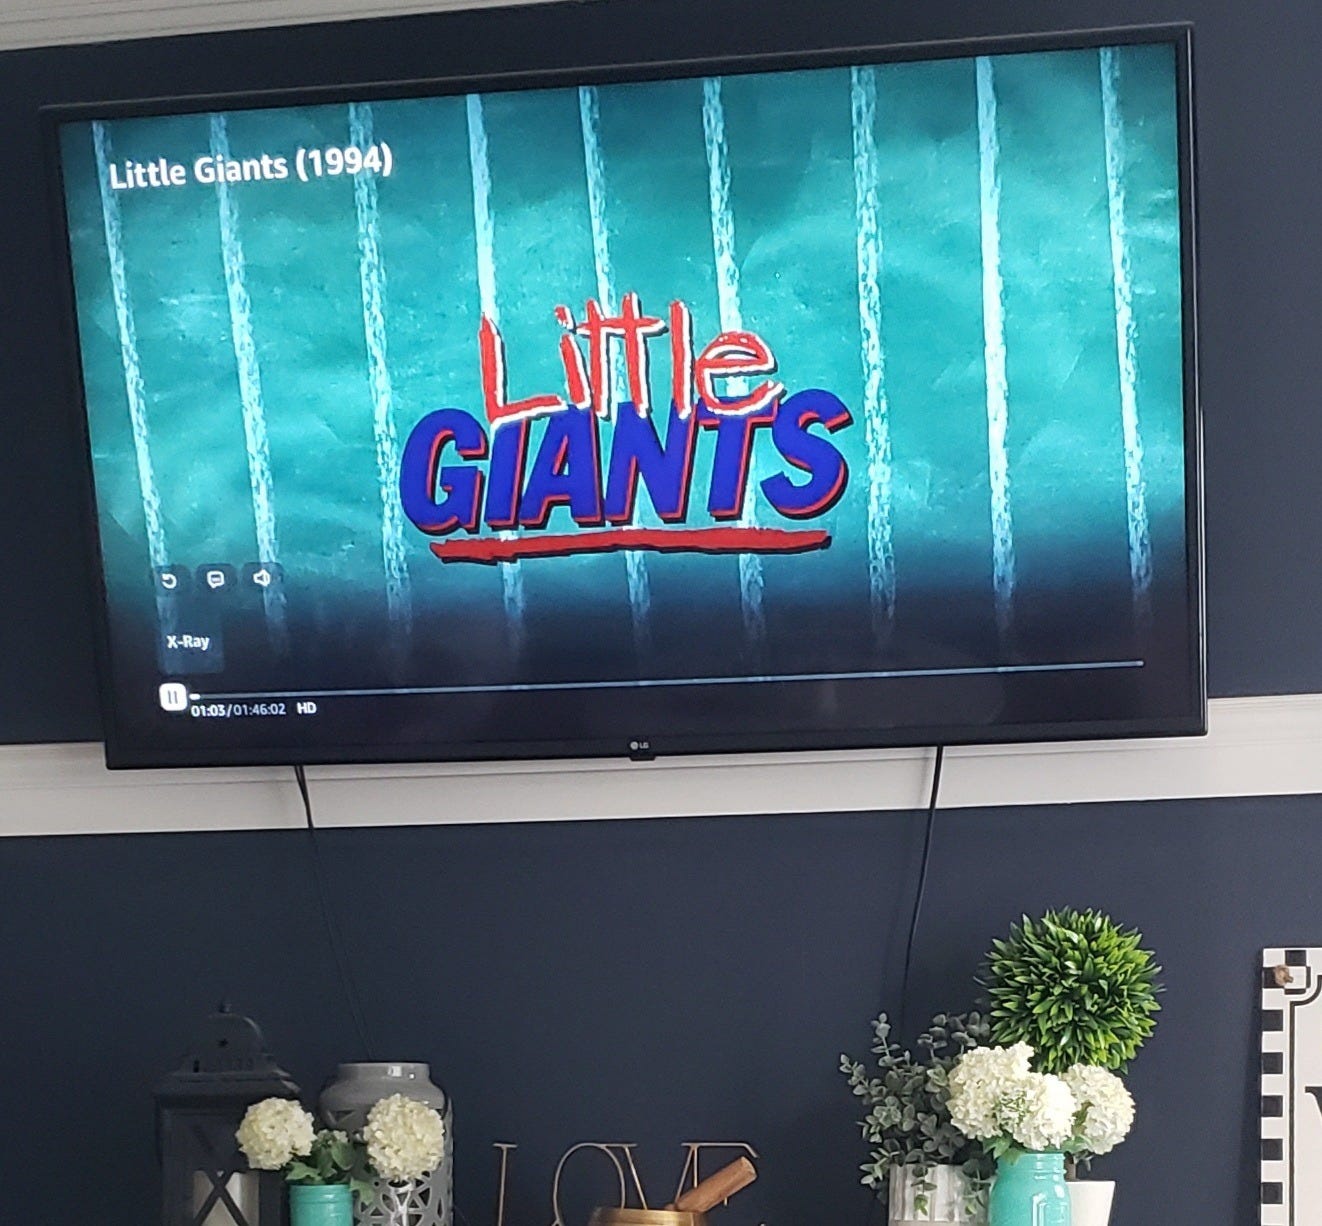 May be an image of television and text that says 'Little Giants (1994) A Little GIANTS X-Ray 01:03/ 6:0 HD'